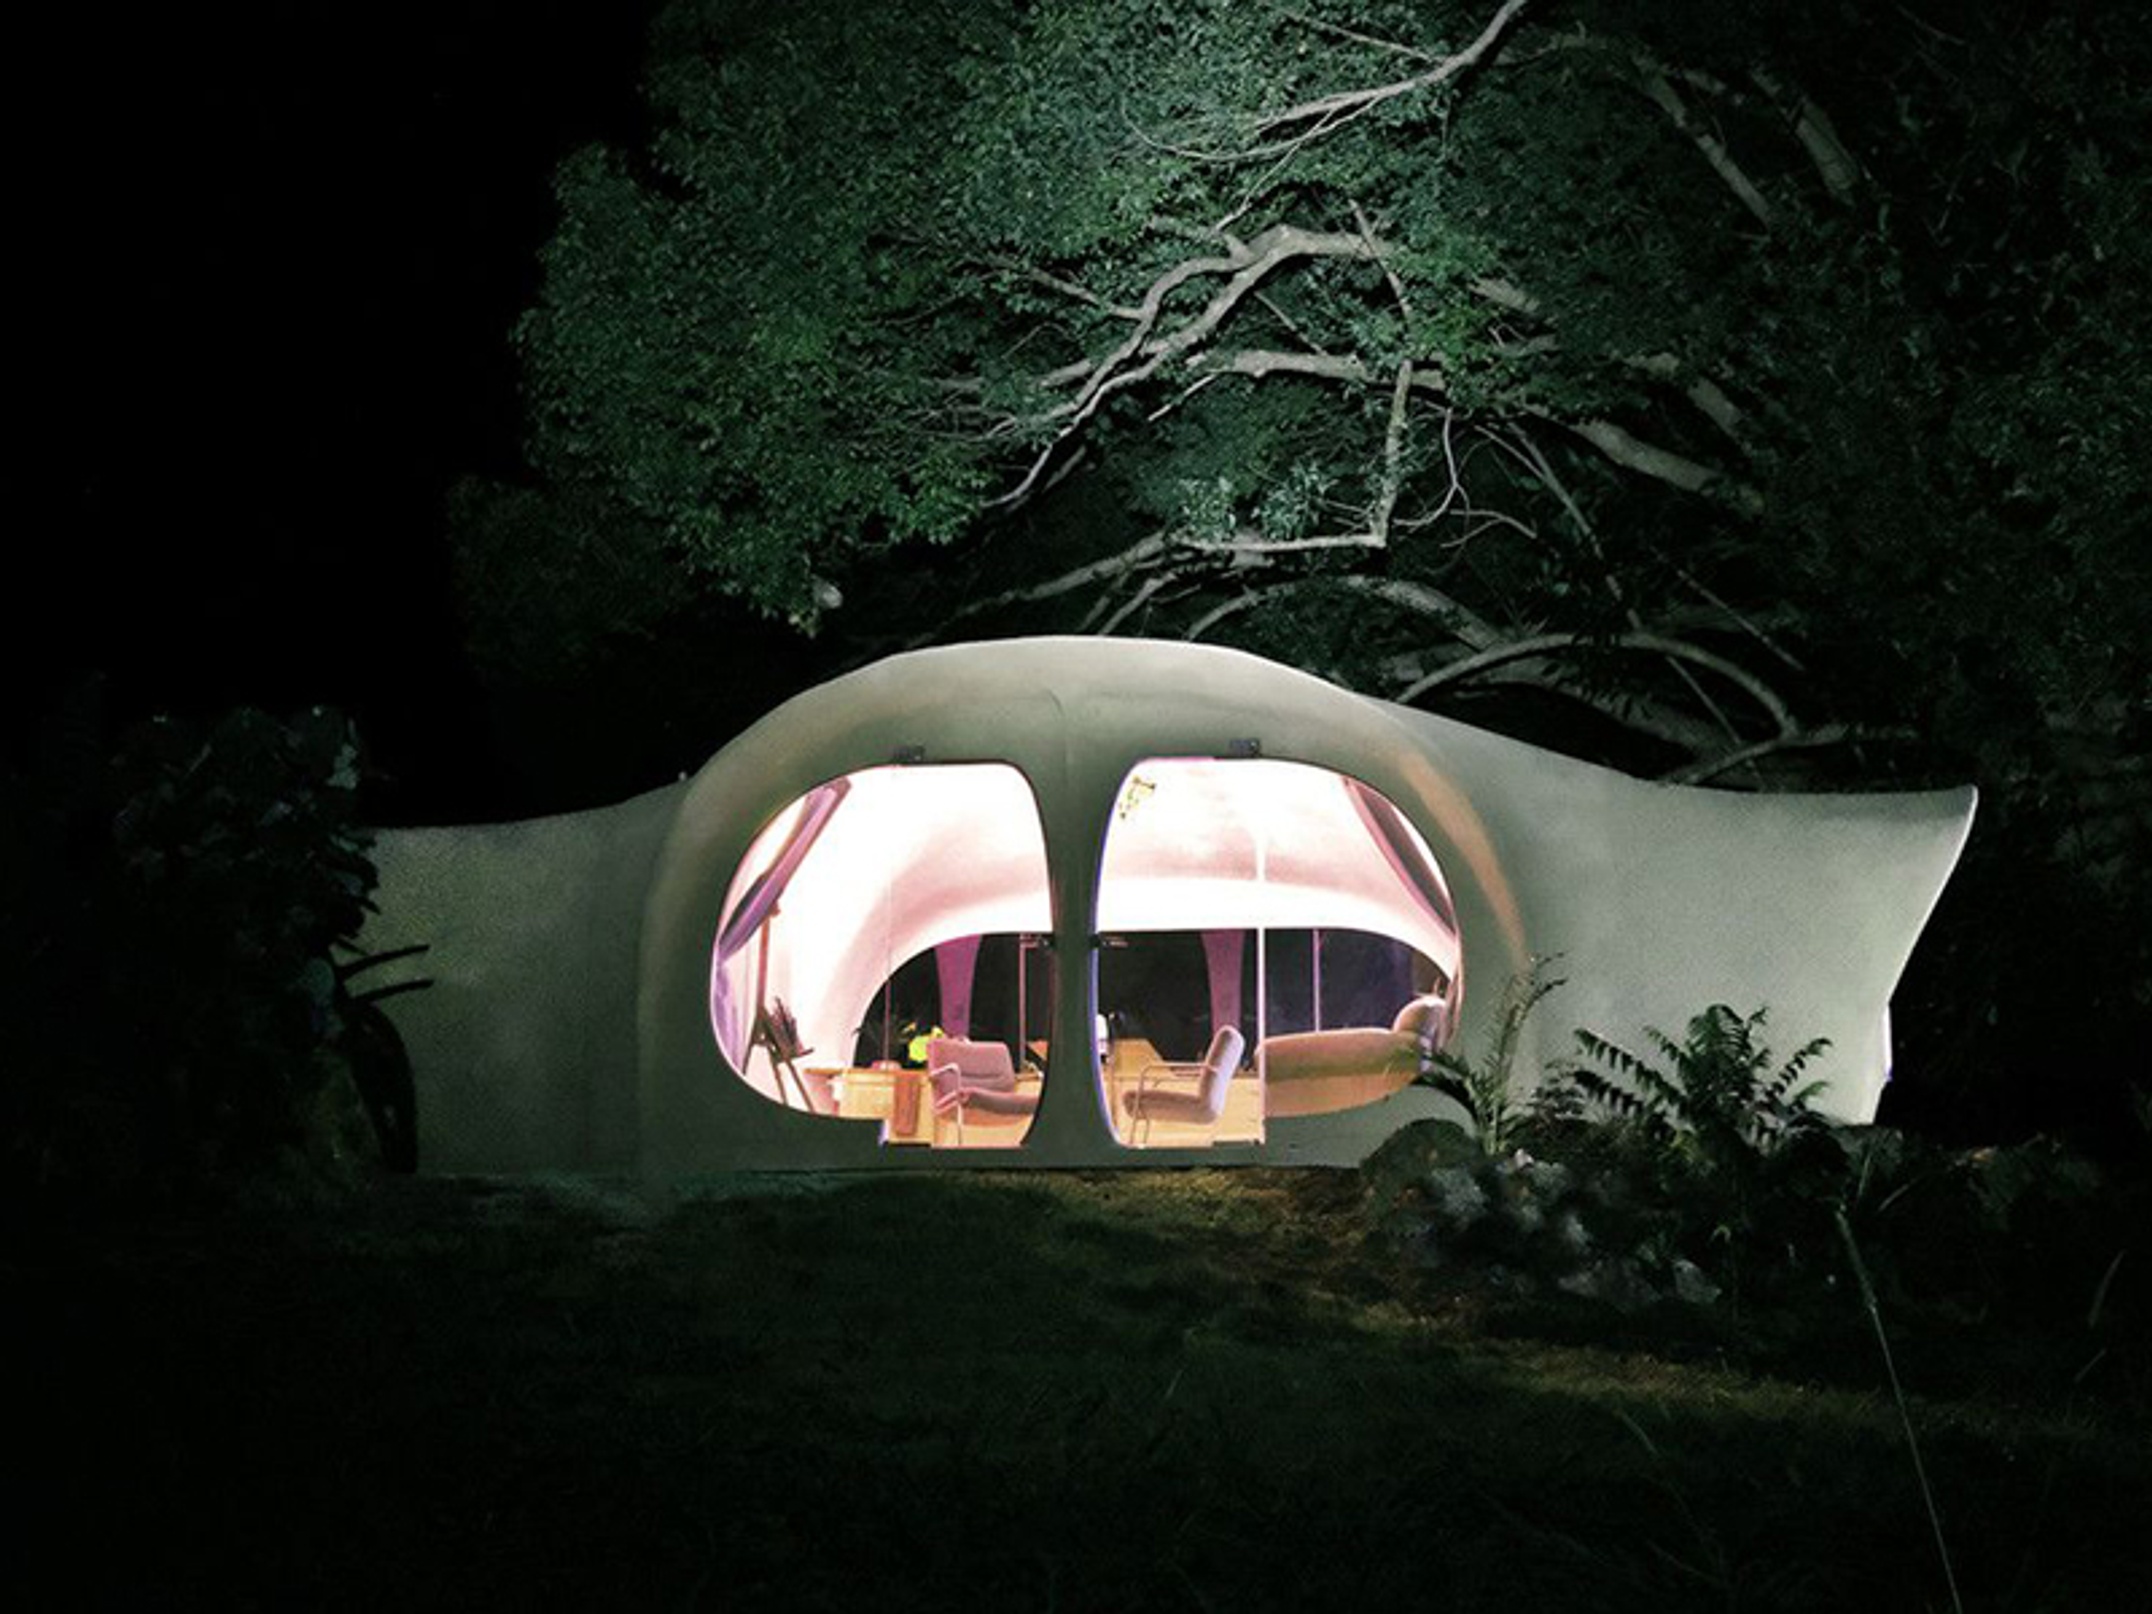 Researchers are looking at diverting local plastic waste from landfill to print 3D houses like this one by Studio Kite.